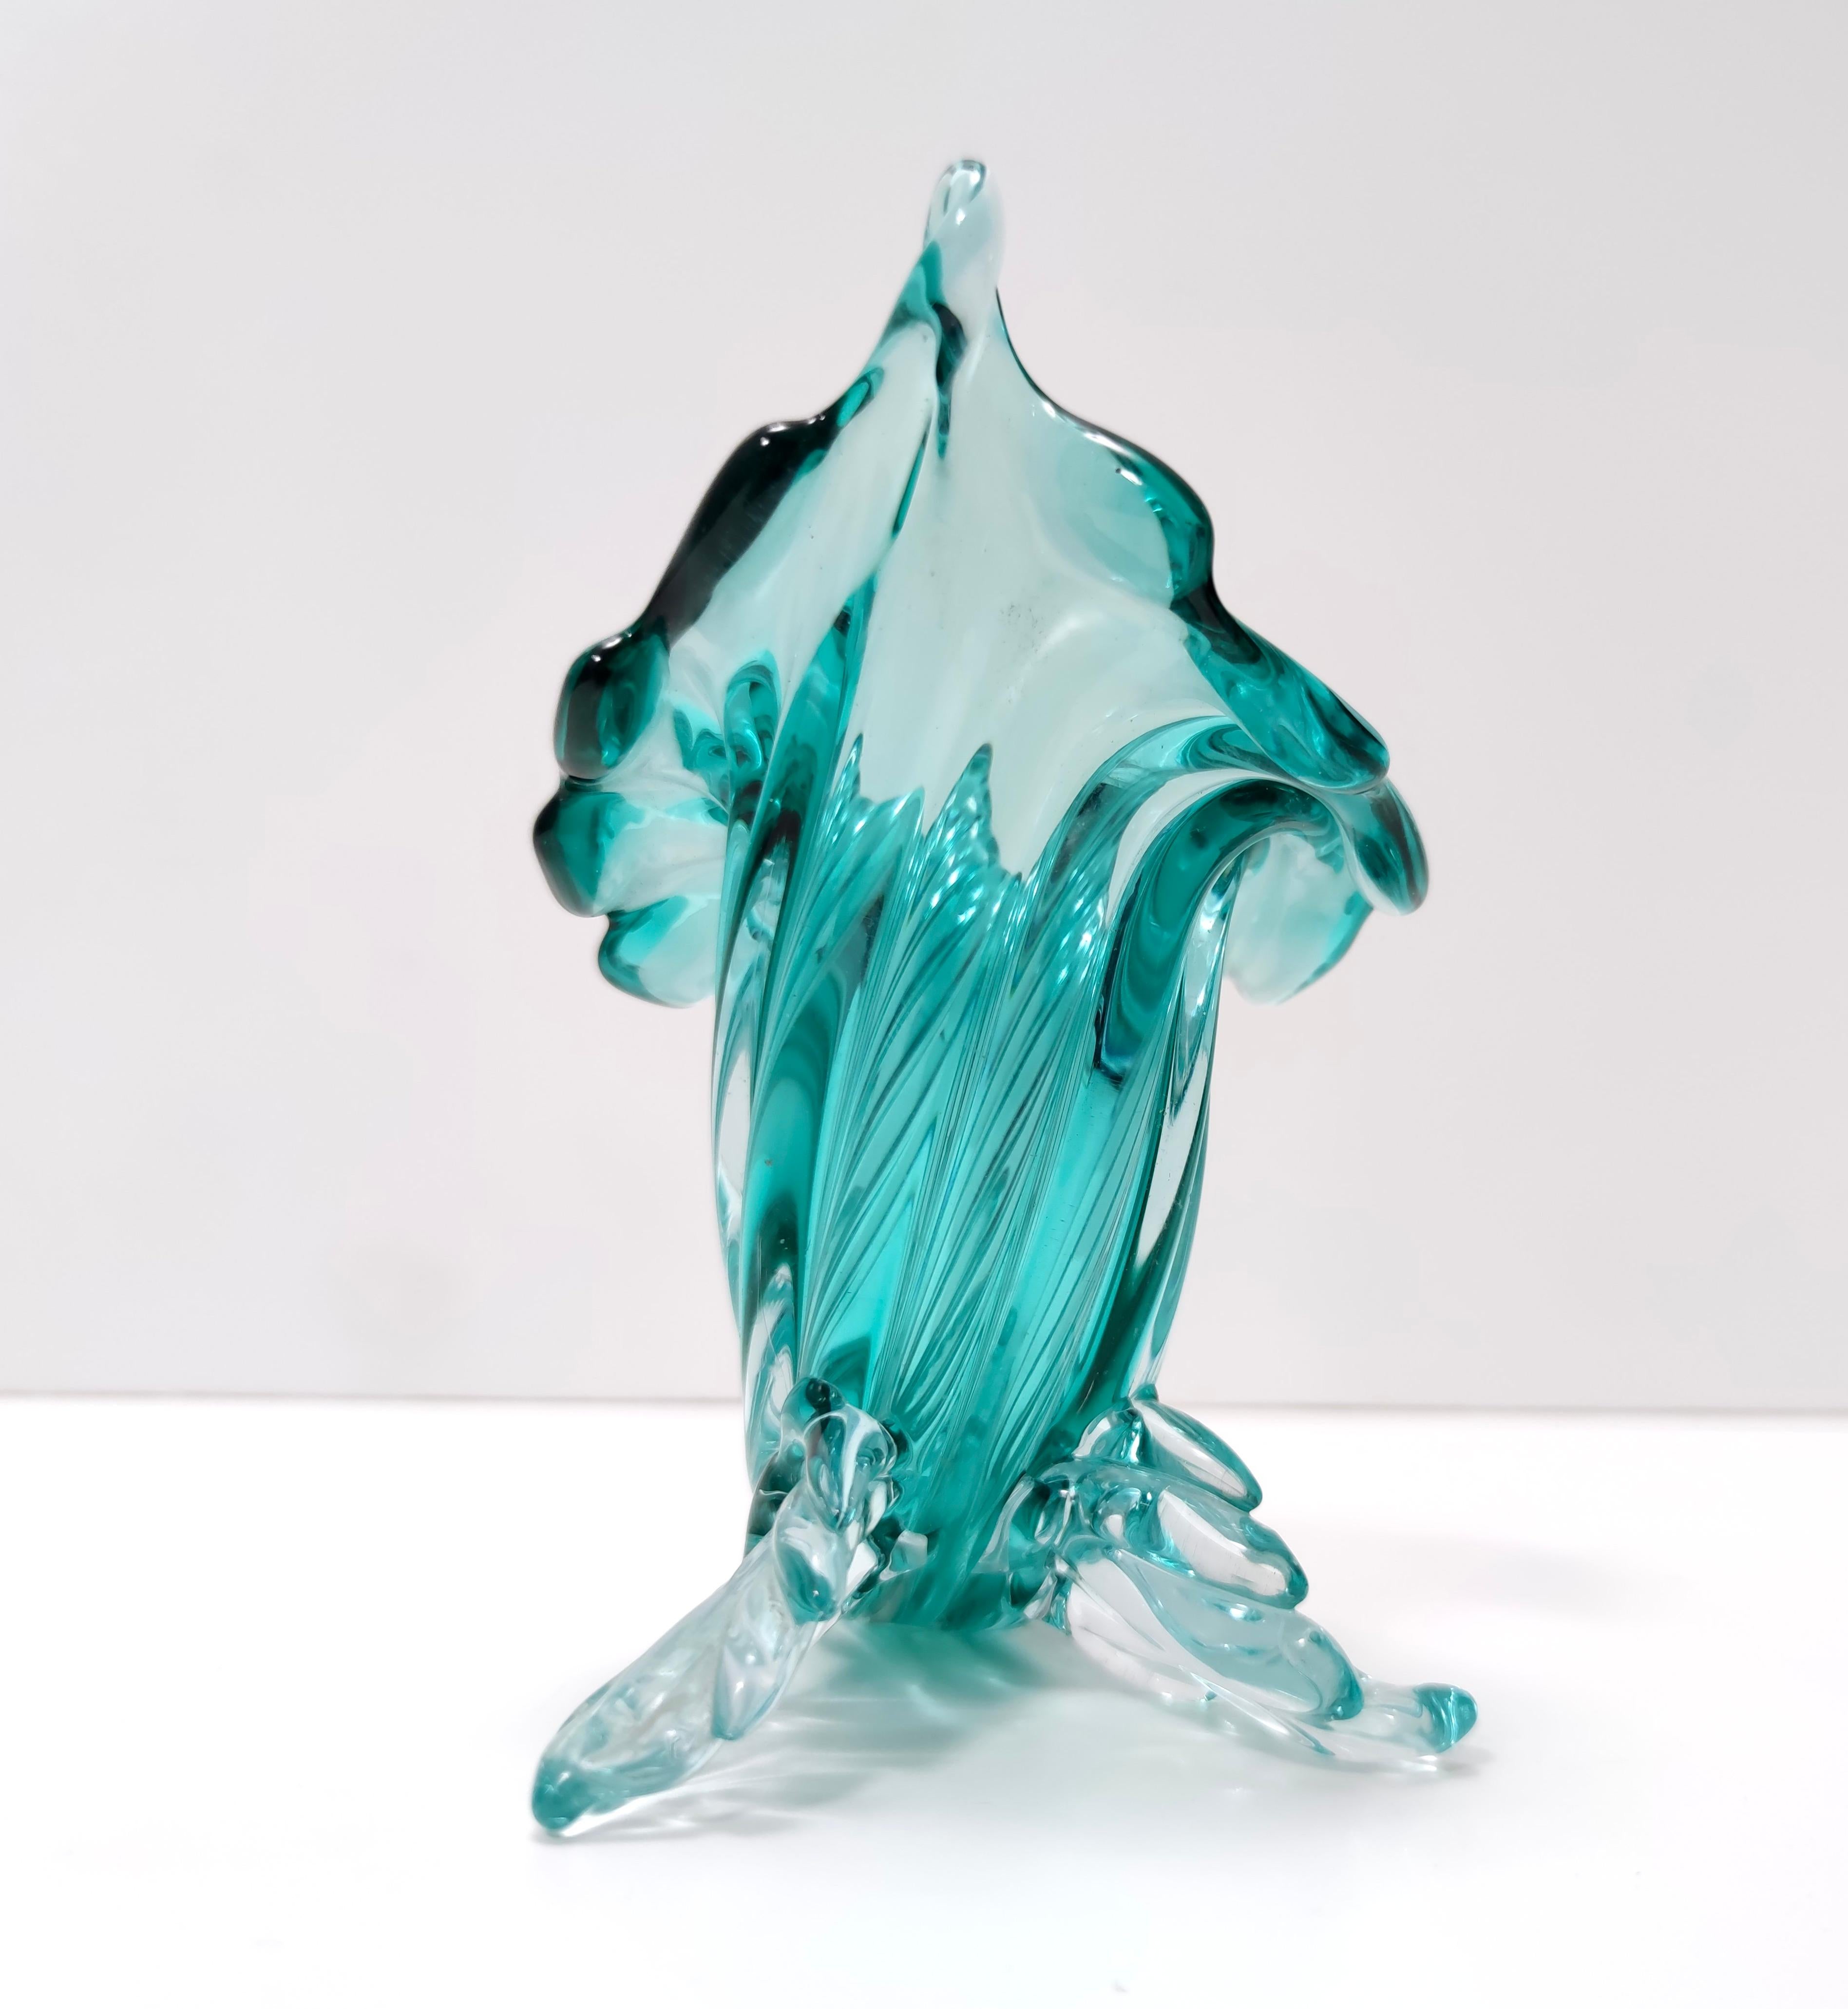 Vintage Teal Murano Glass Cornucopia Vase by Archimede Seguso, Italy For Sale 2